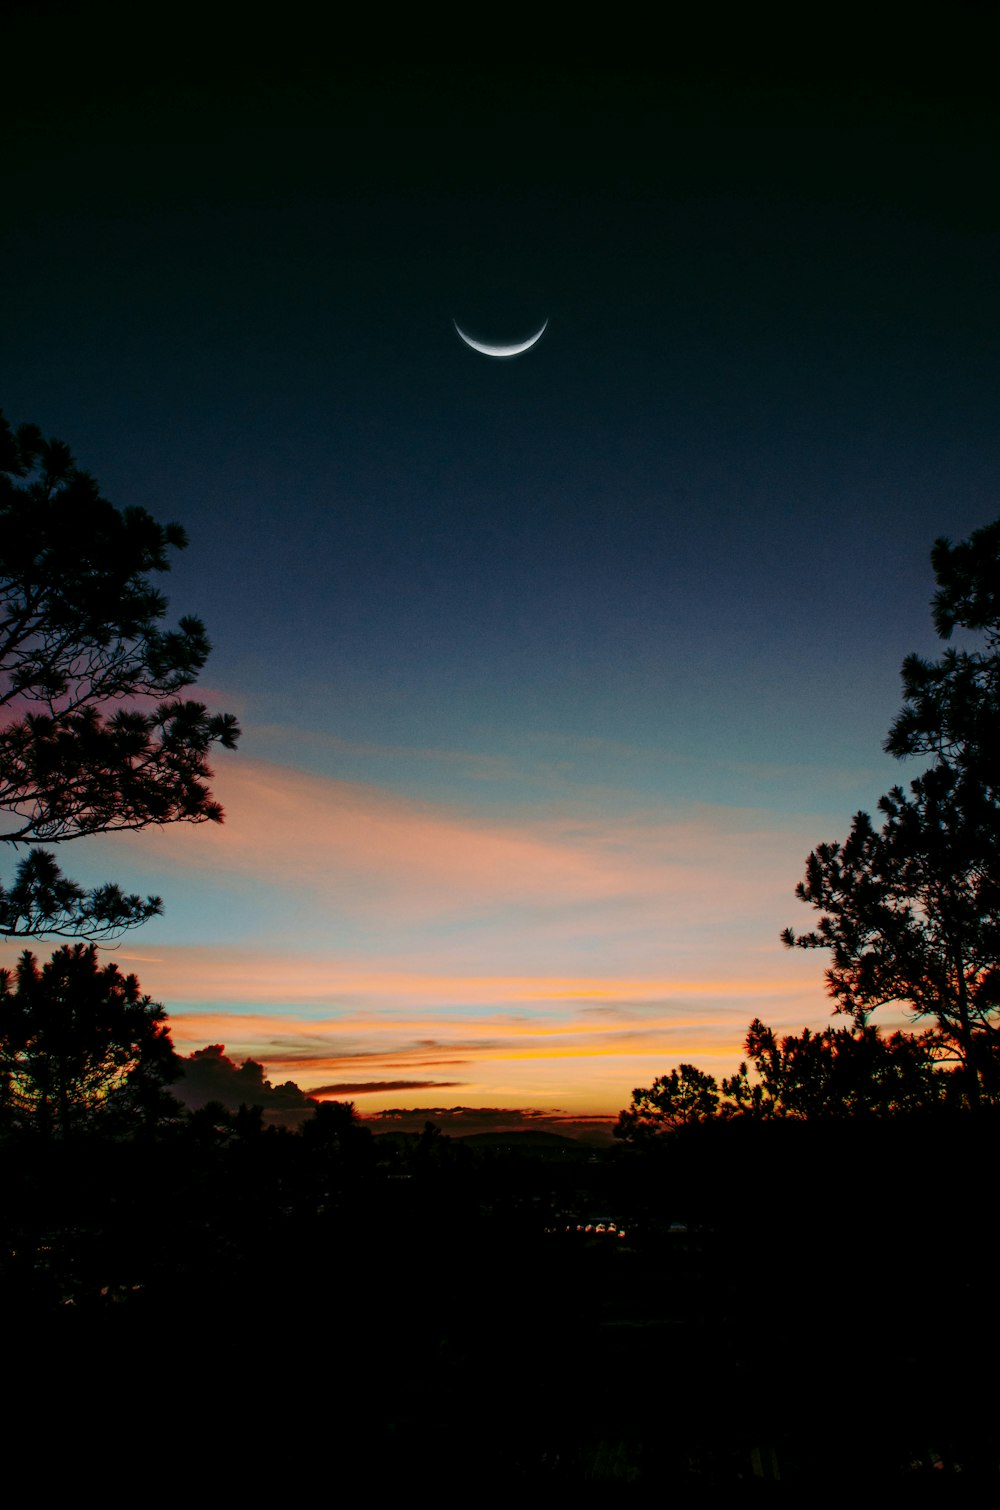 a crescent is seen in the sky above trees